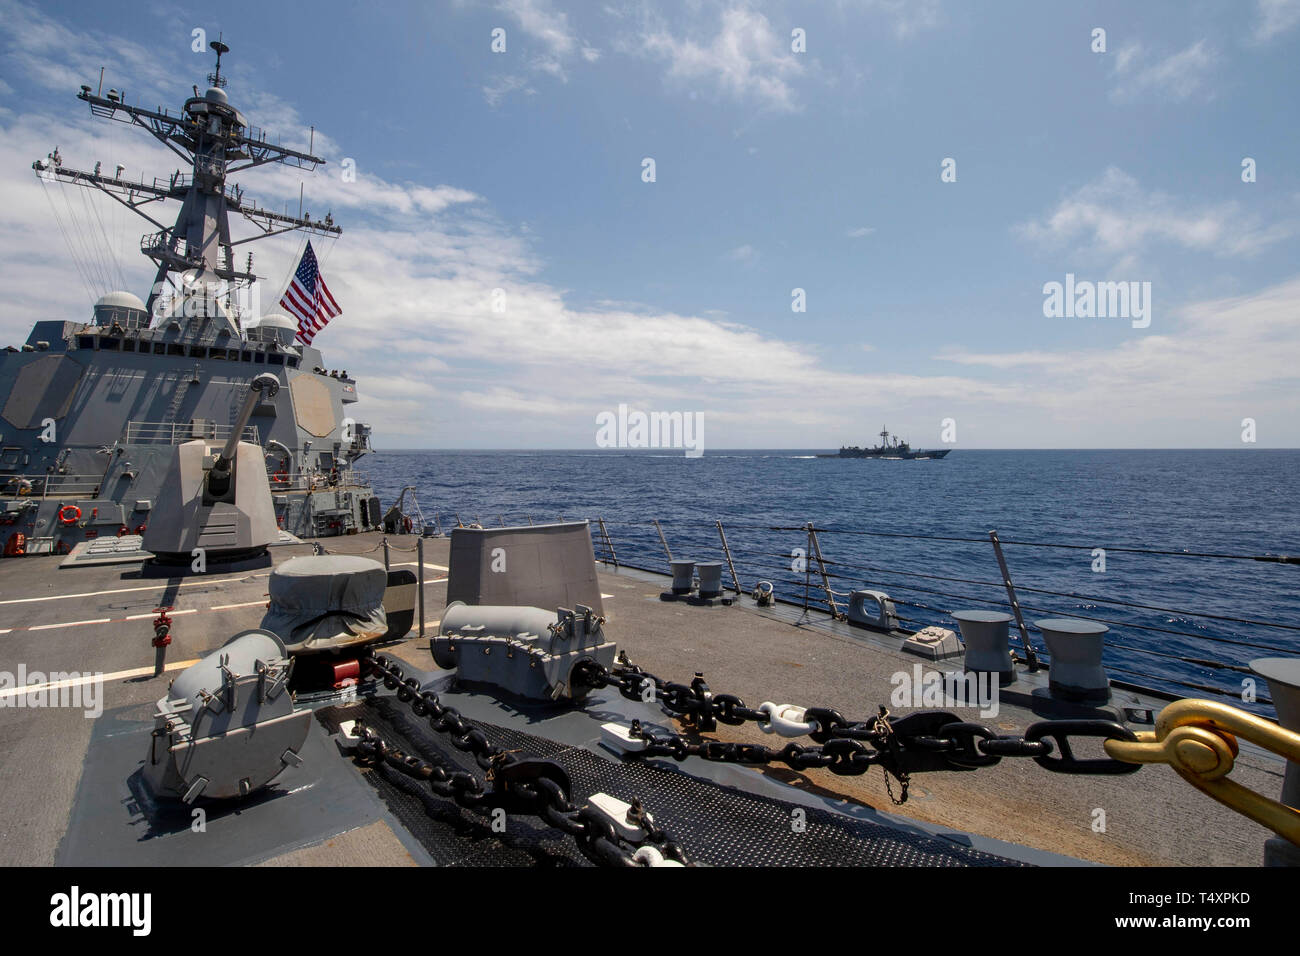 190418-N-UI104-0237     PHILIPPINE SEA (April 18, 2019) The Arleigh Burke-class guided-missile destroyer USS Preble (DDG 88) and the Royal Australian Navy Adelaide-class guided-missile frigate HMAS Melbourne (FFG 05) transit in formation during a cooperative deployment. Preble and Melbourne are participating in a cooperative deployment in order to improve on maritime capabilities between partners.  Preble is deployed to the U.S 7th Fleet area of operations in support of security and stability in the Indo-Pacific region. (U.S. Navy photo by Mass Communication Specialist 1st Class Bryan Niegel/R Stock Photo